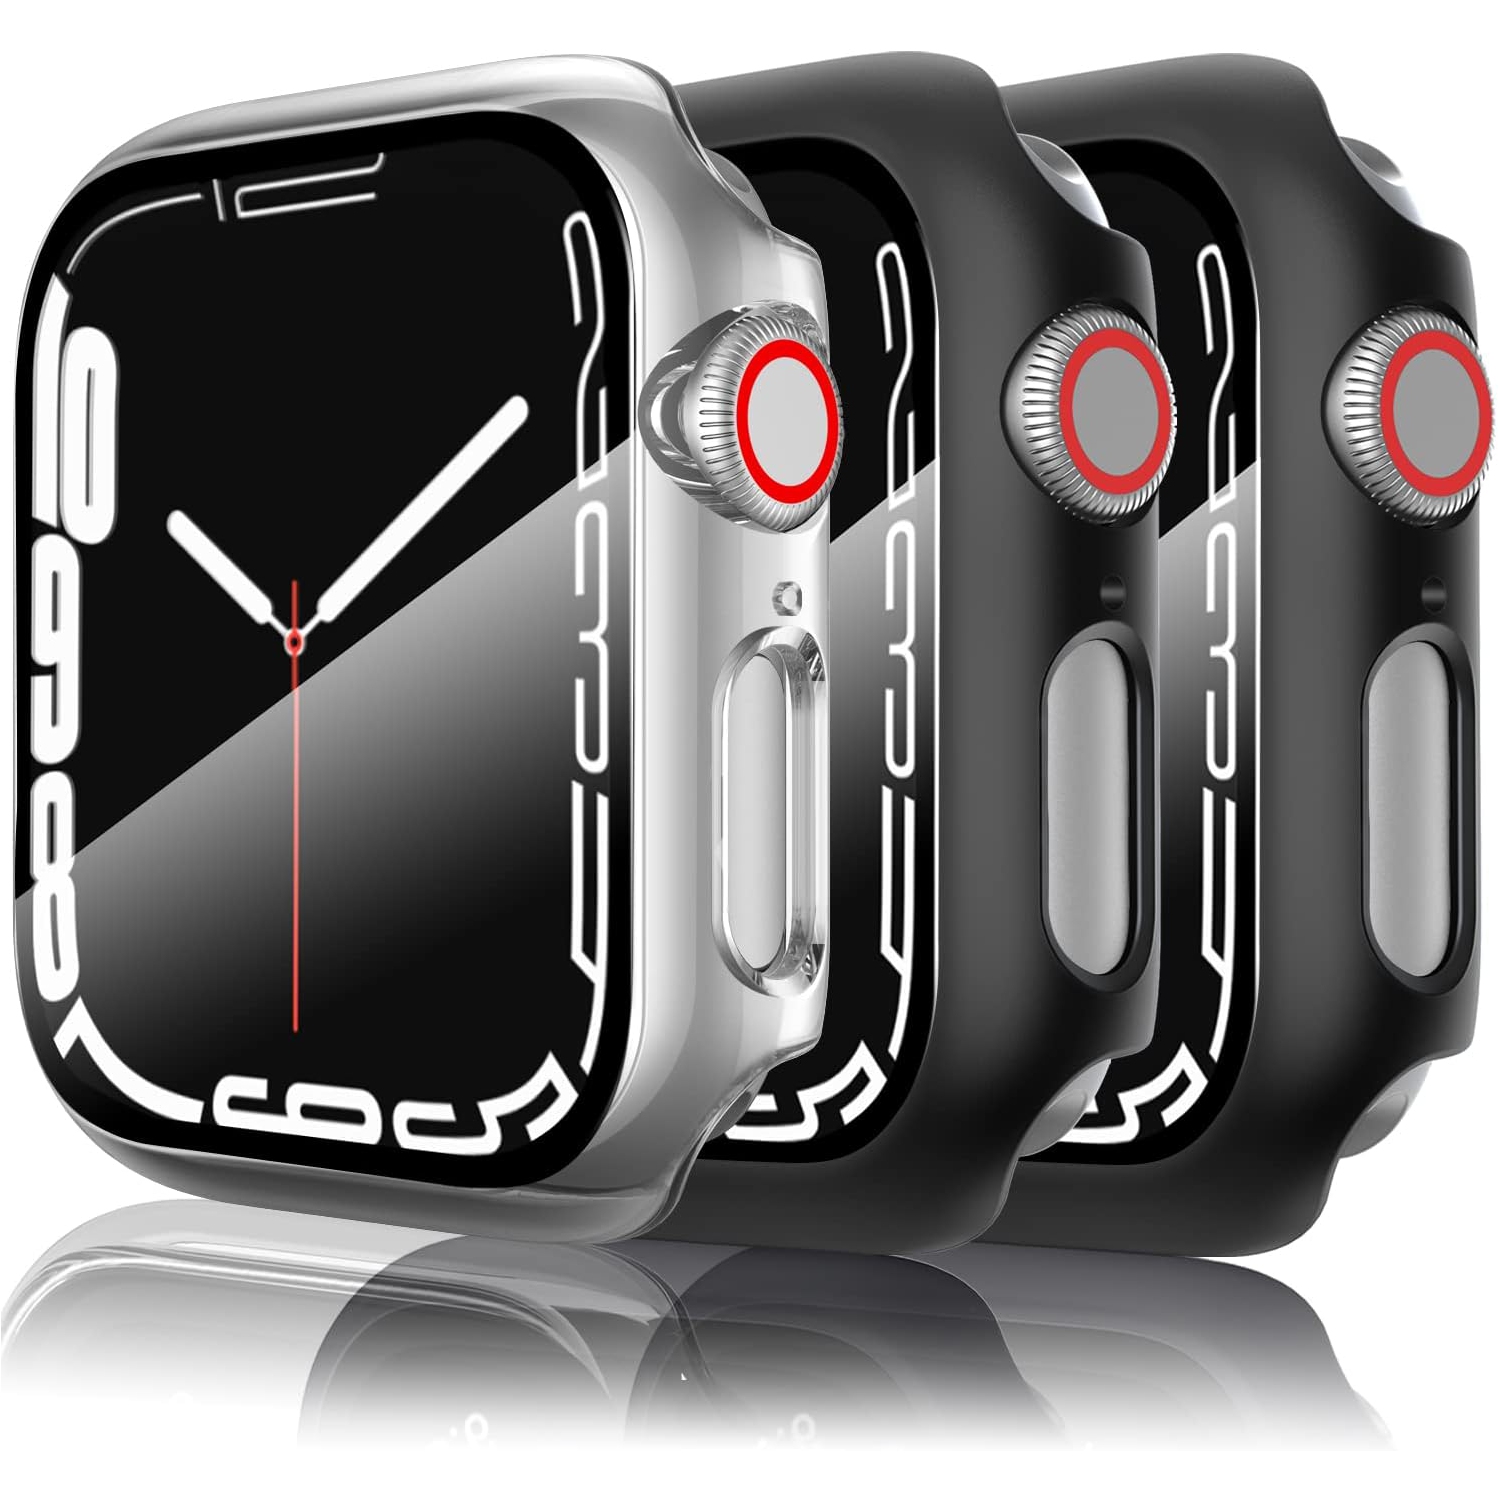 3-Pack Case for Apple Watch Screen Protector 42mm Series 3/2/1, Hard PC Full Protective Case Bumper Cover